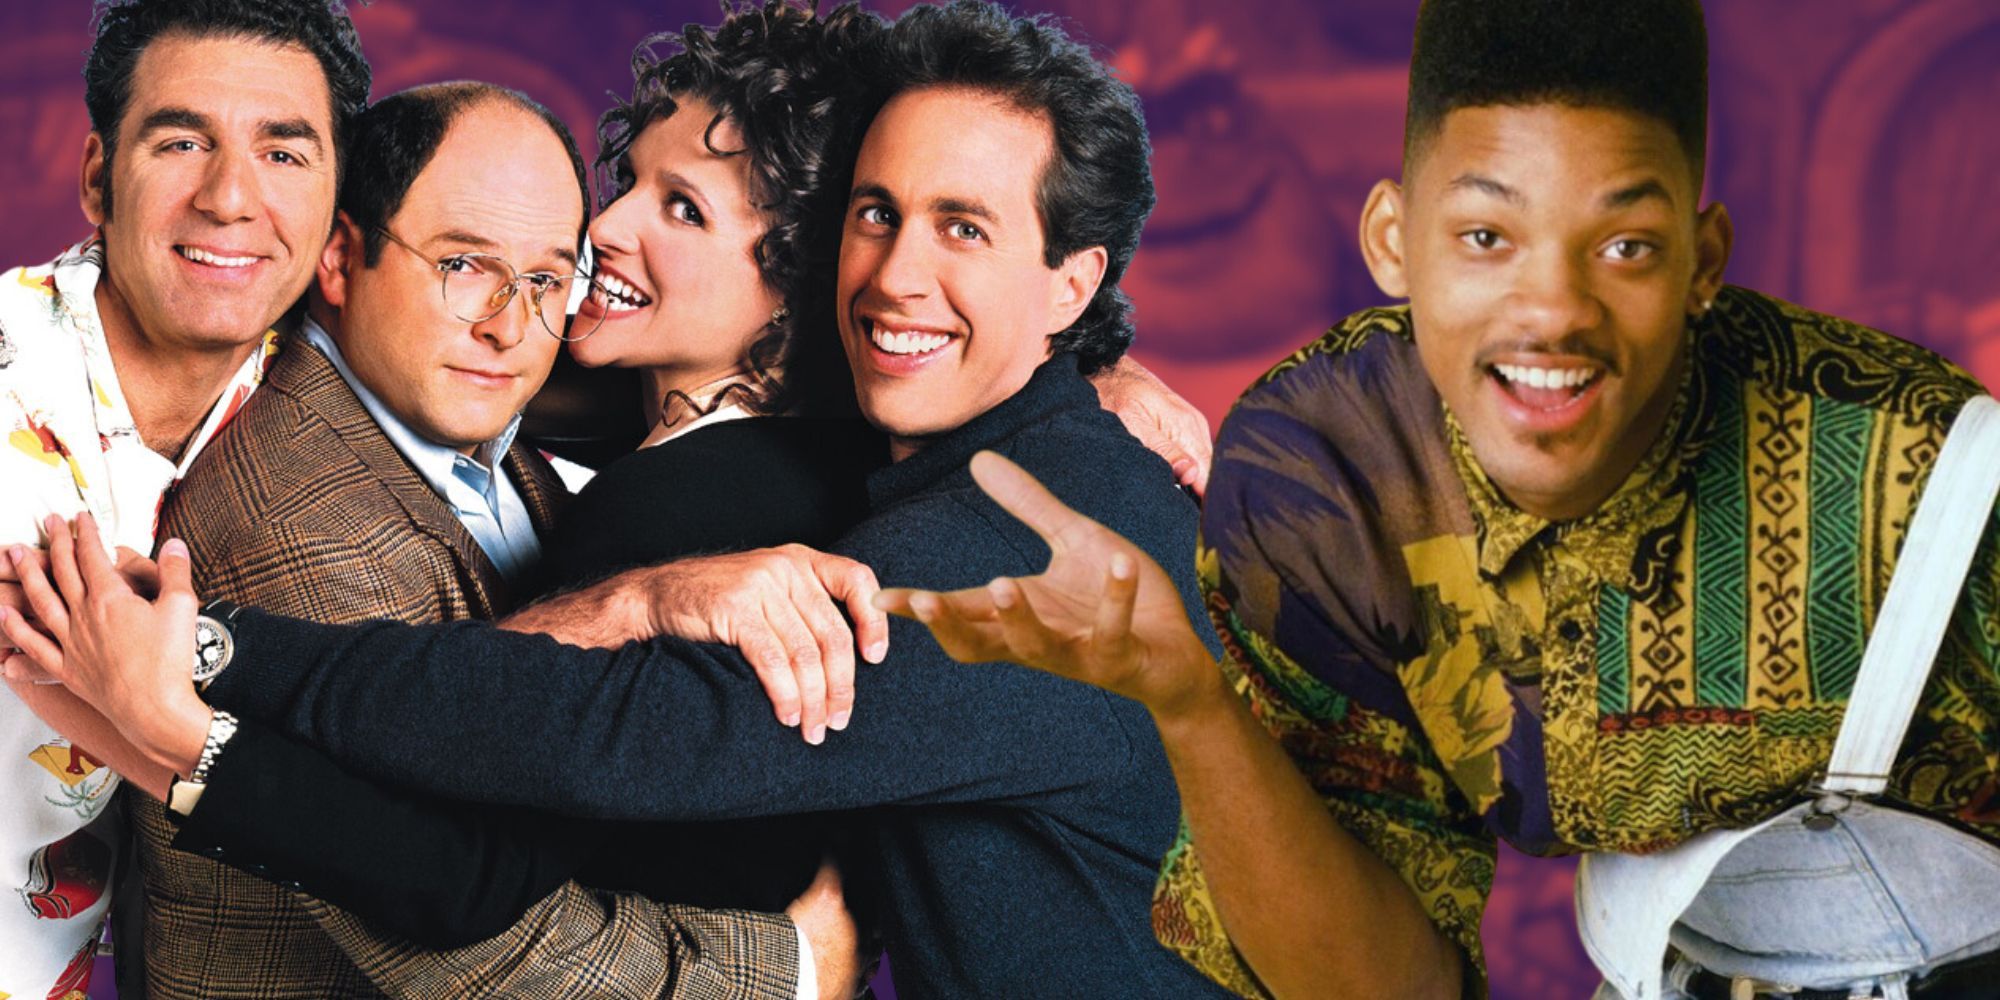 Composite image of the Seinfeld Cast and Will Smith in the Prince of Bel Air with the family of Dinosaurs in the background